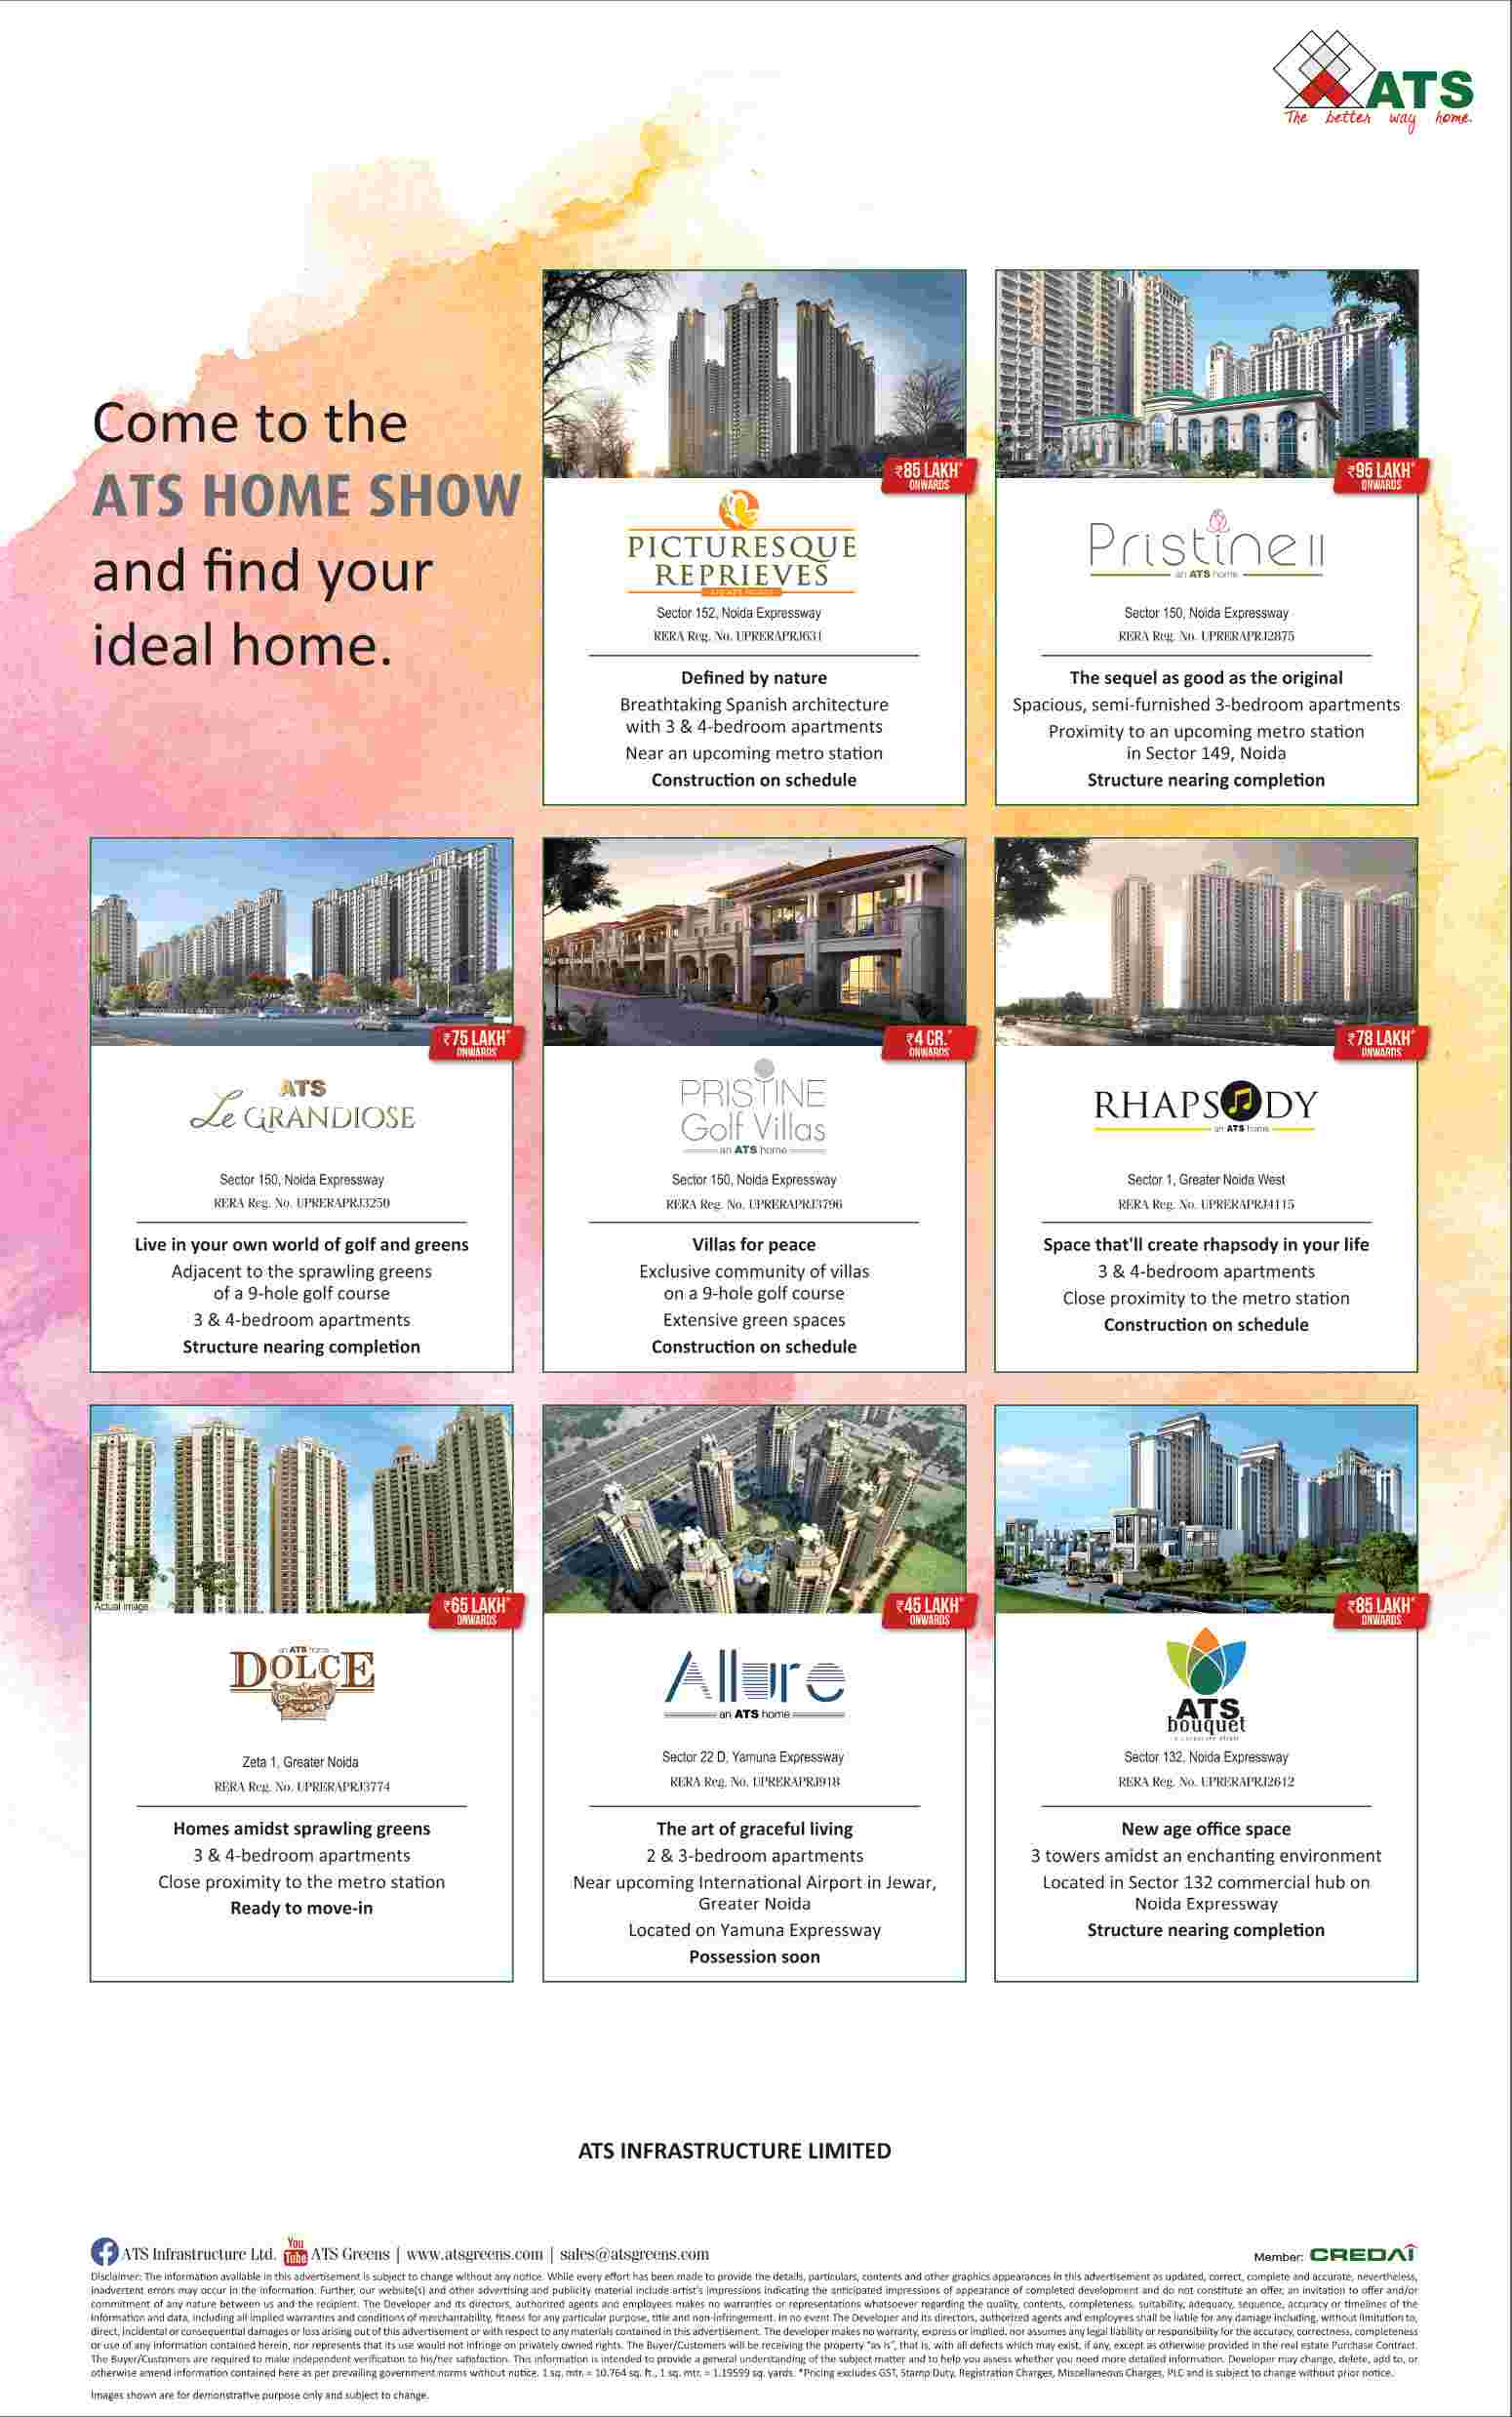 Come to the ATS Home Show and find your ideal home Update